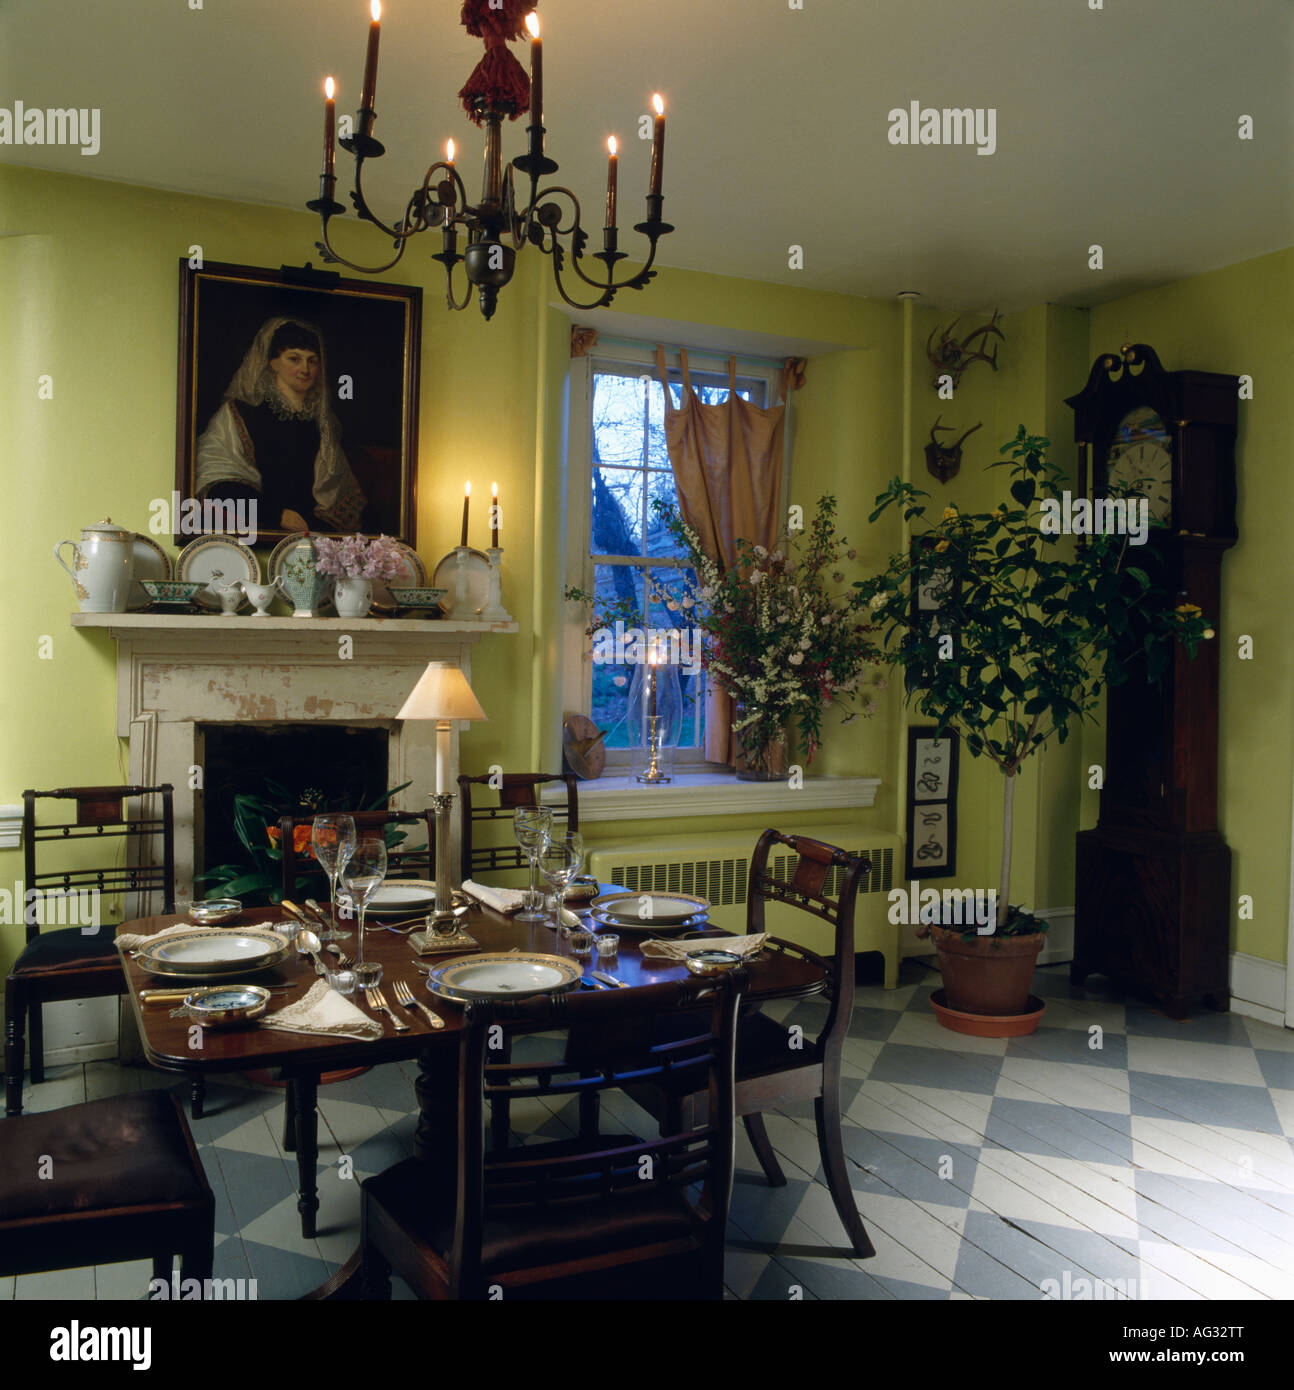 Chandelier Above Antique Table And Chairs In Lime Green Dining